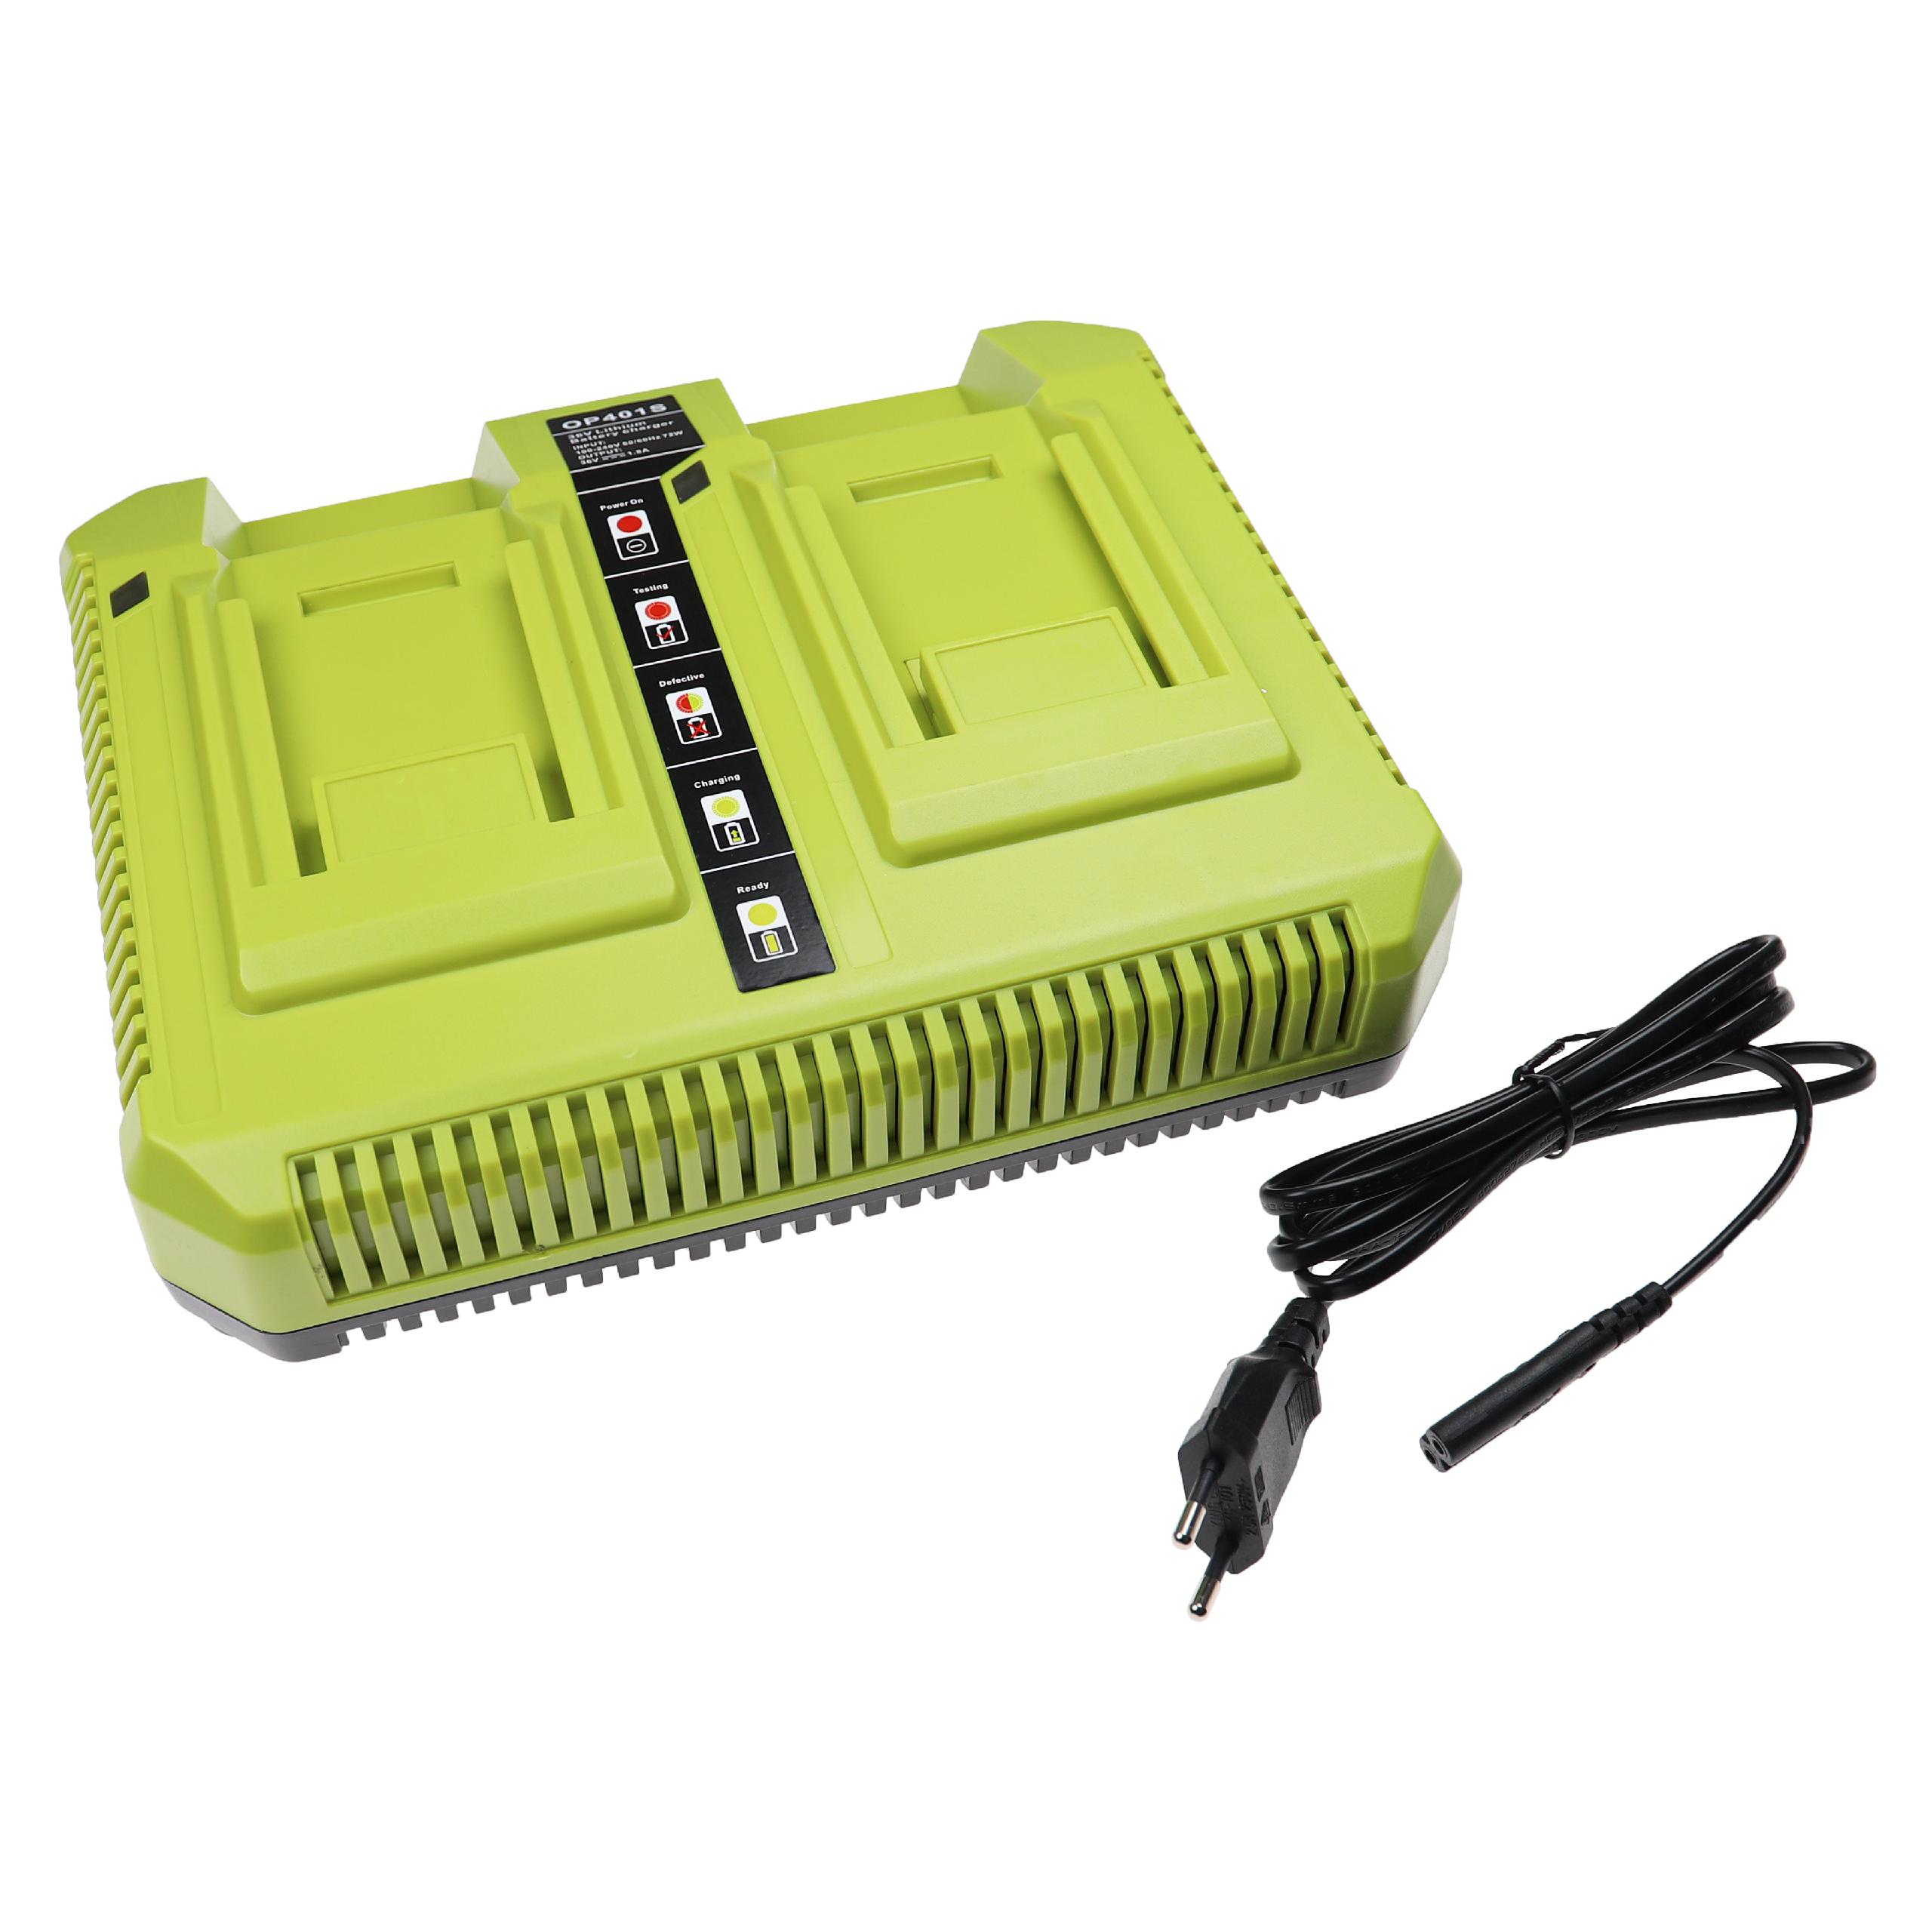 Dual Charger suitable for 40V 14 IN Brushless Chain Saw Ryobi, 40V 14 IN Brushless Chain Saw Power Tool / Lawn